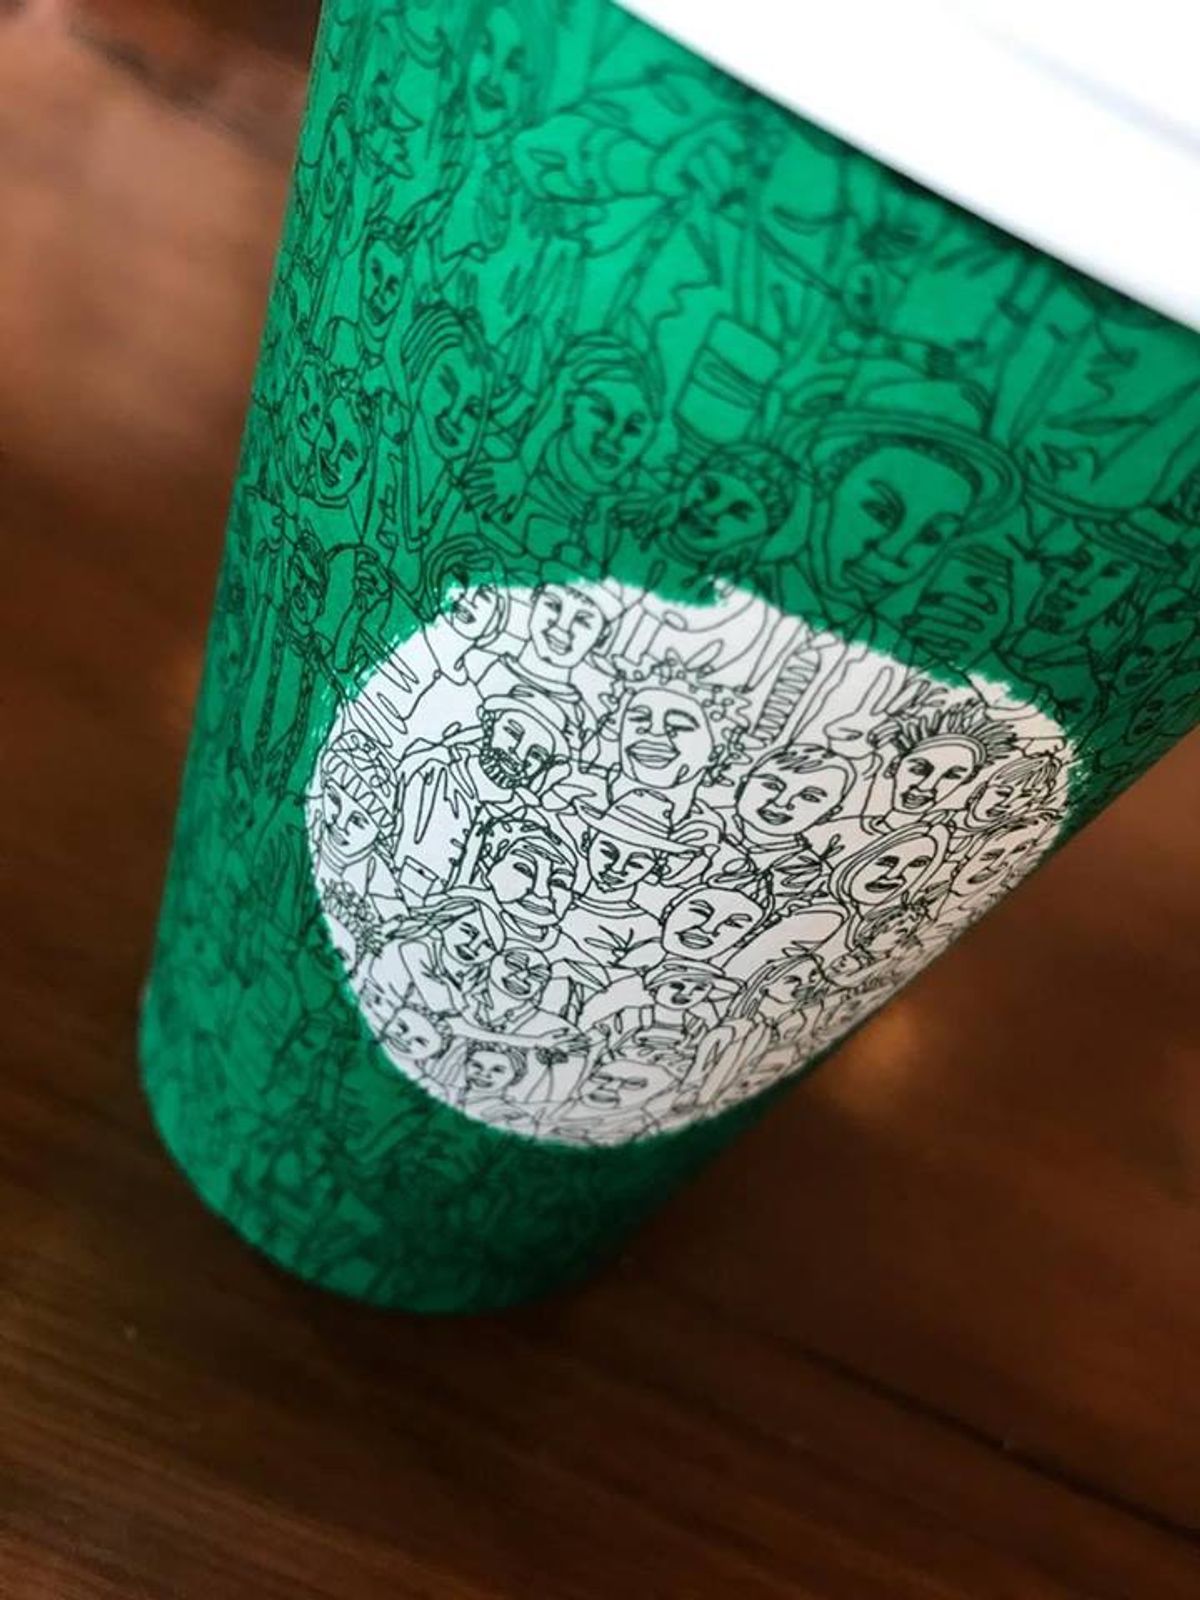 Starbucks Holiday Cup: Another Year, Another Controversy